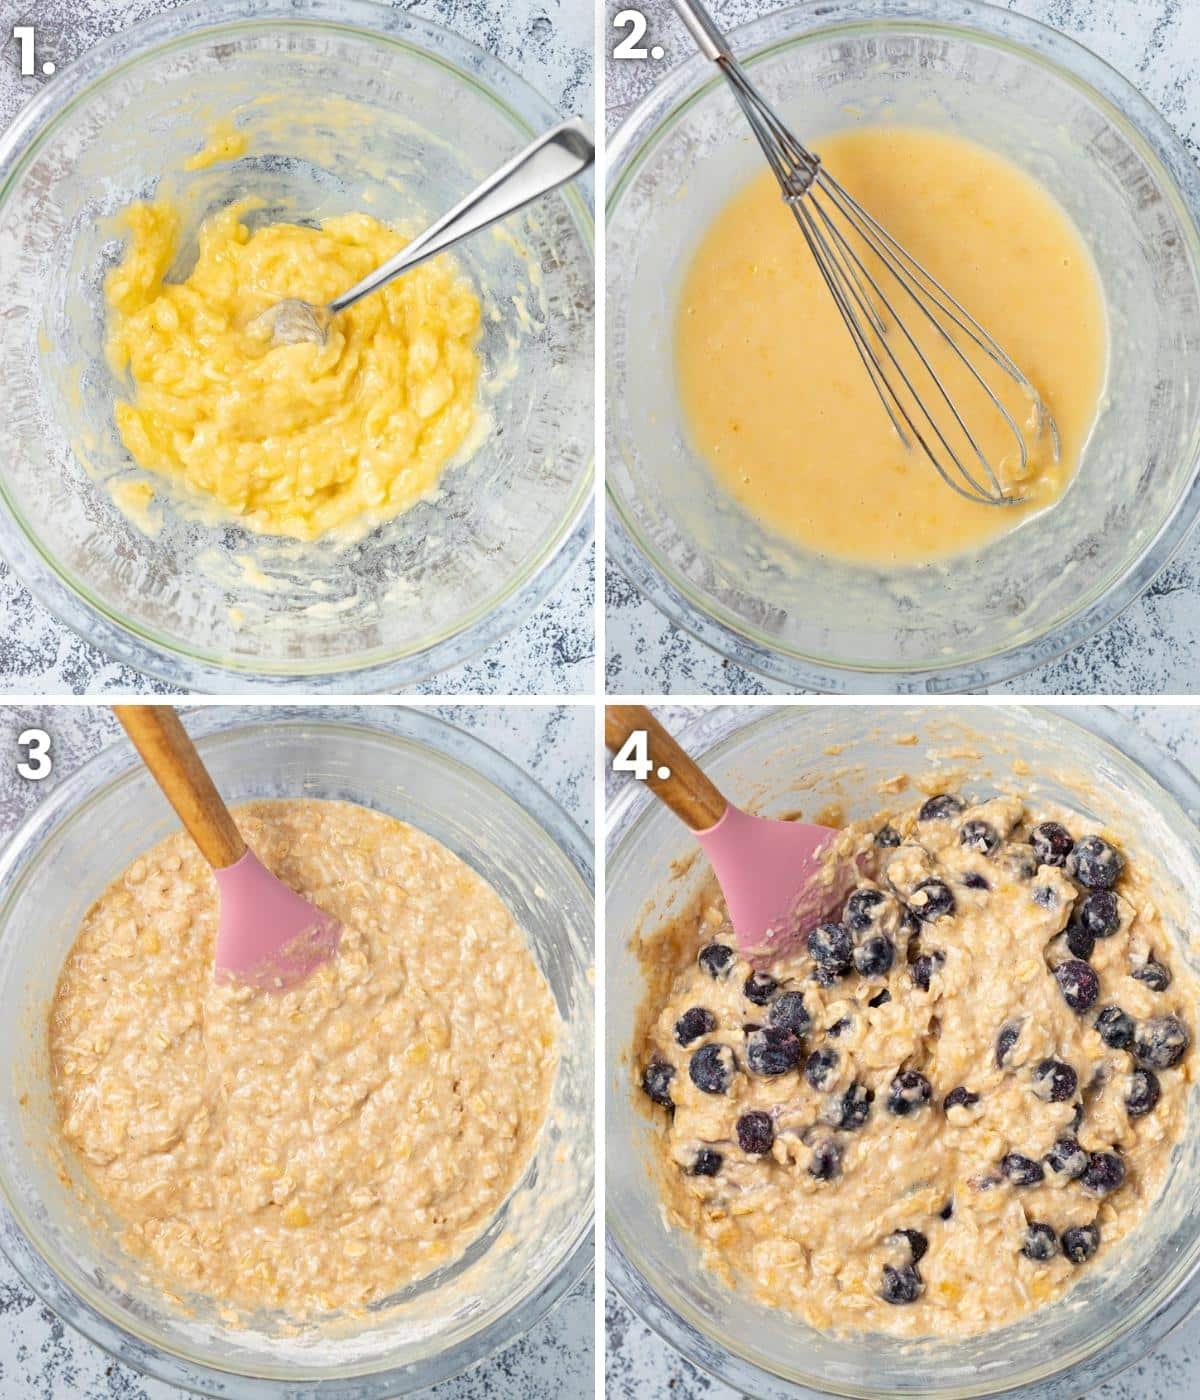 how to make the muffins step by step as per the written instructions